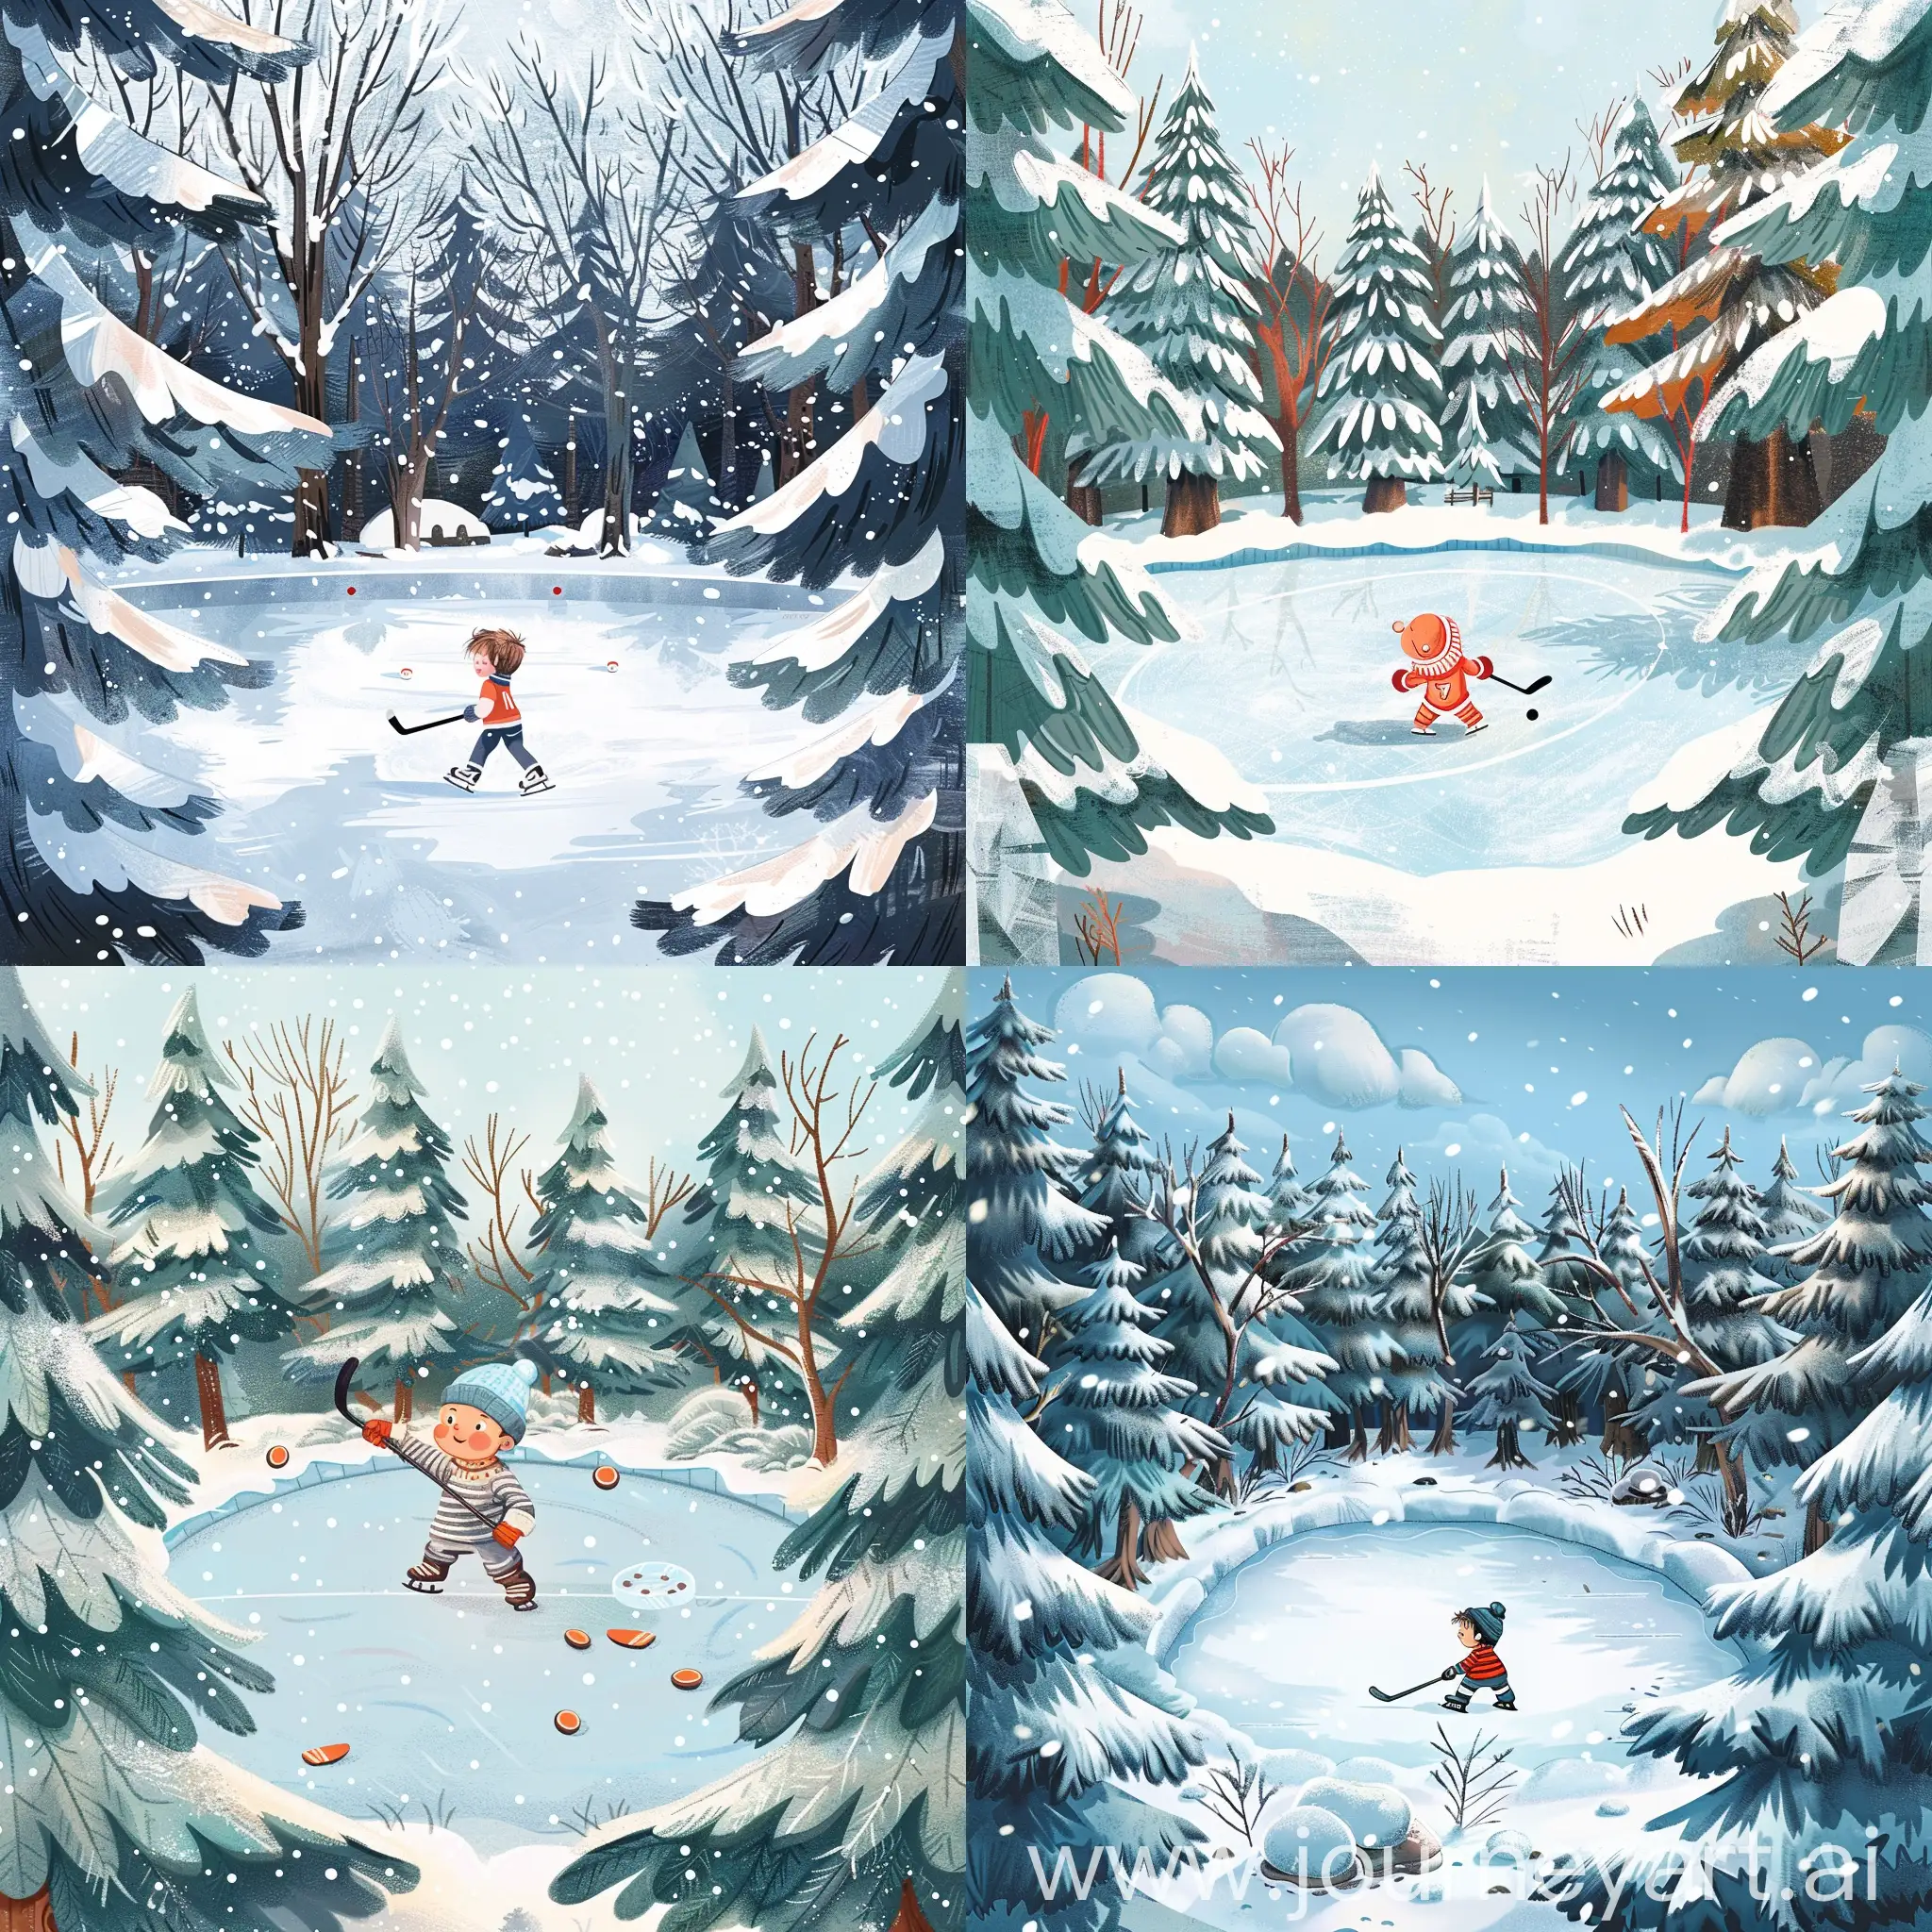 children's book illustration of a baby playing hockey on an outdoor ice rink surrounded by snow covered trees